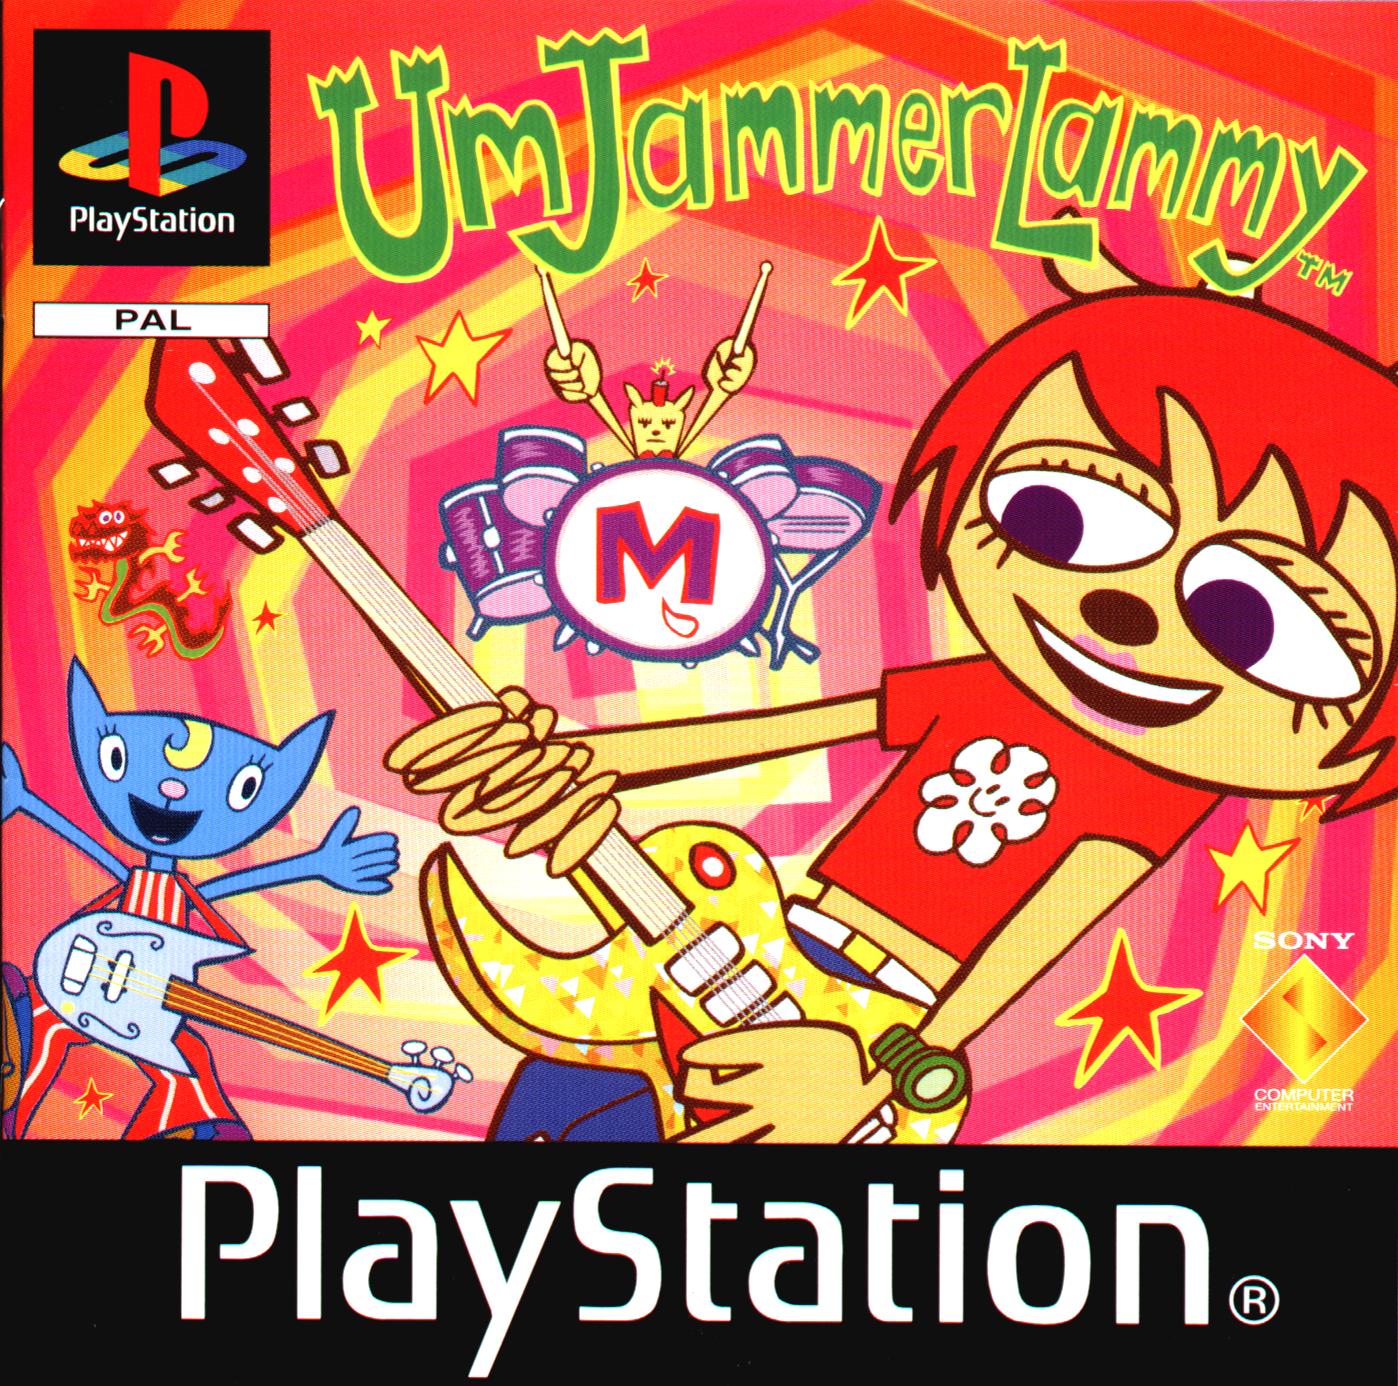 Judge a game by its cover Um_Jammer_Lammy_Pal